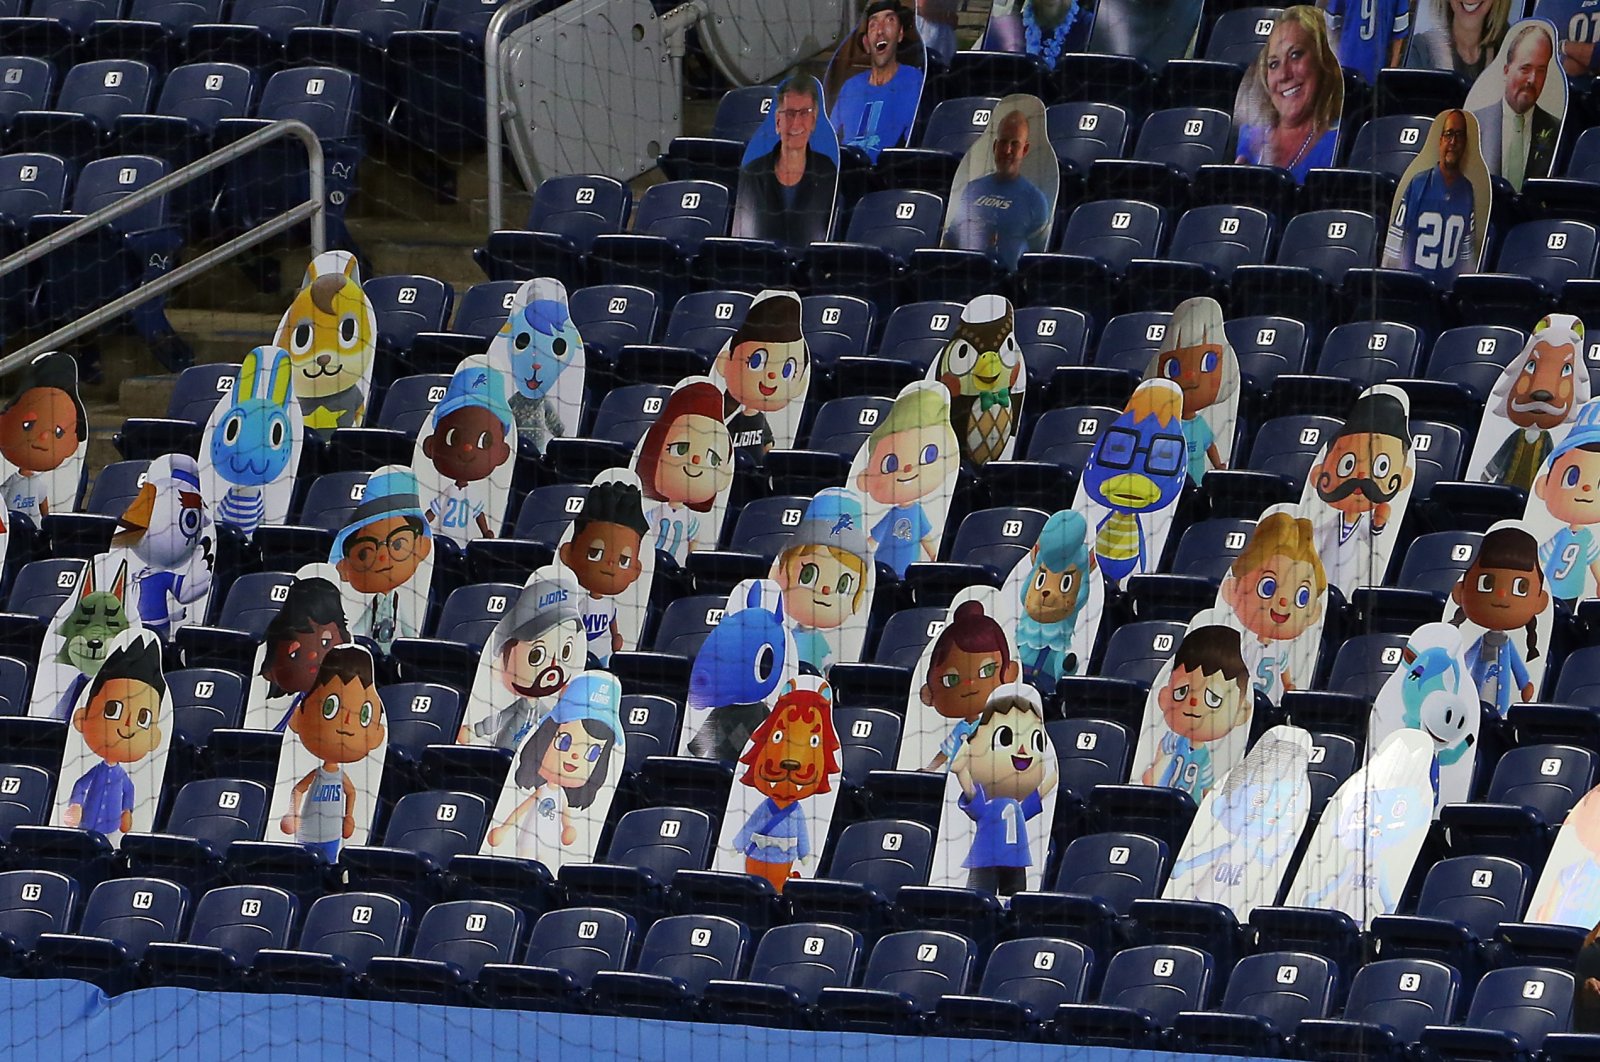 Cutout photos from the game Animal Crossing are placed in seating areas, during an NFL football game between the Washington Football Team and the Detroit Lions, in Detroit, Michigan, U.S., Nov. 15, 2020. (Getty Images)